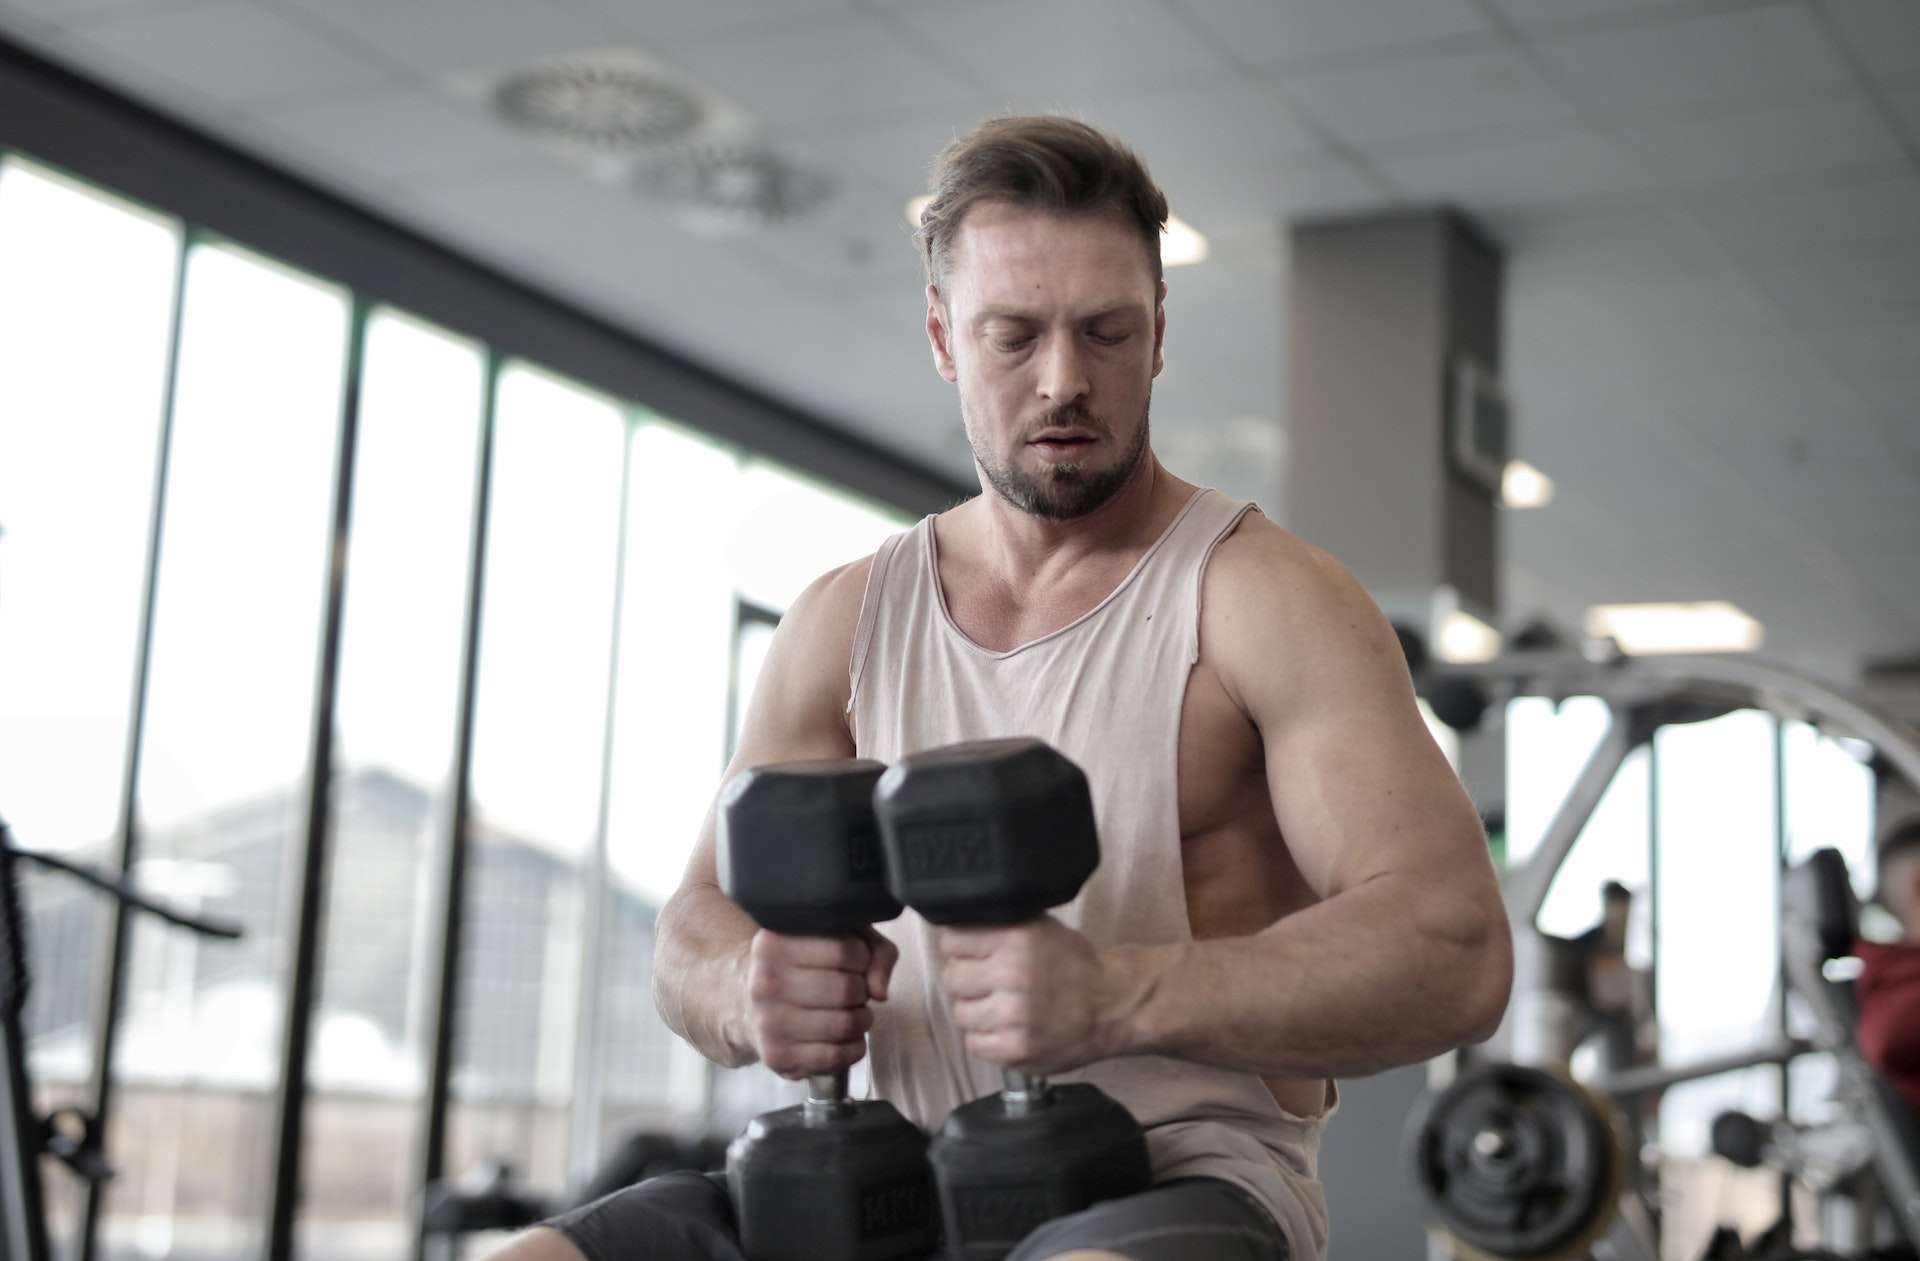 Man In Tank Top Holding Dumbbells